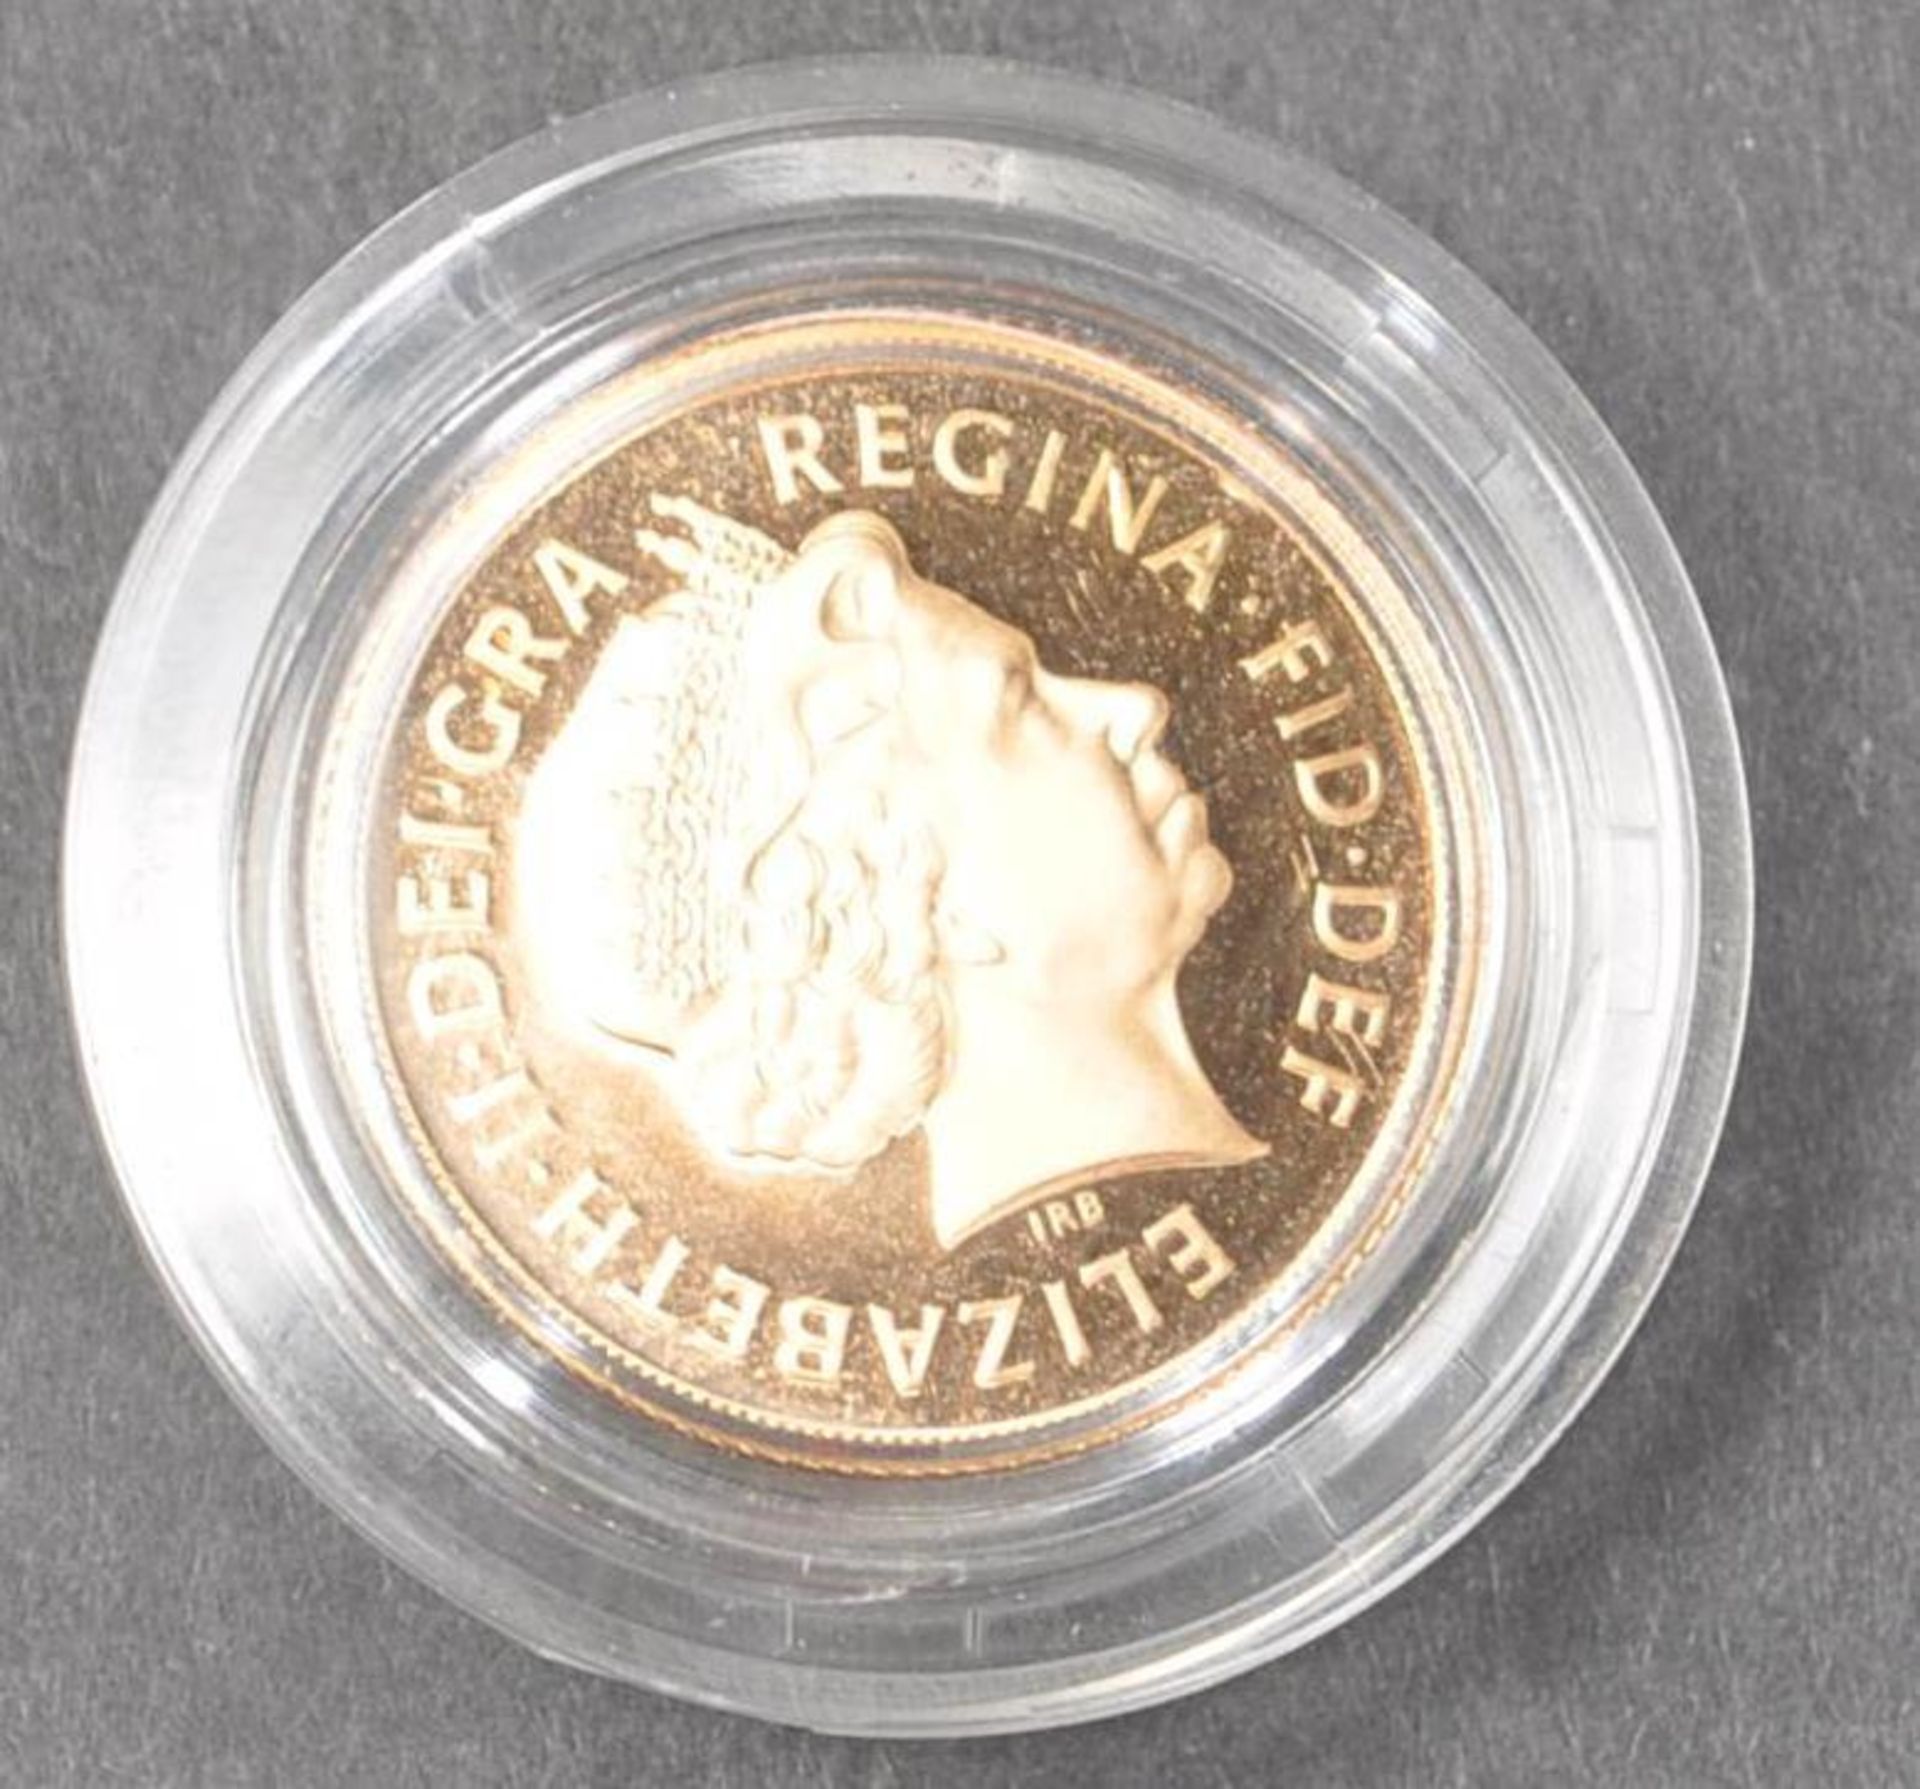 2005 ELIZABETH II 22CT GOLD SOVEREIGN COIN - Image 2 of 4